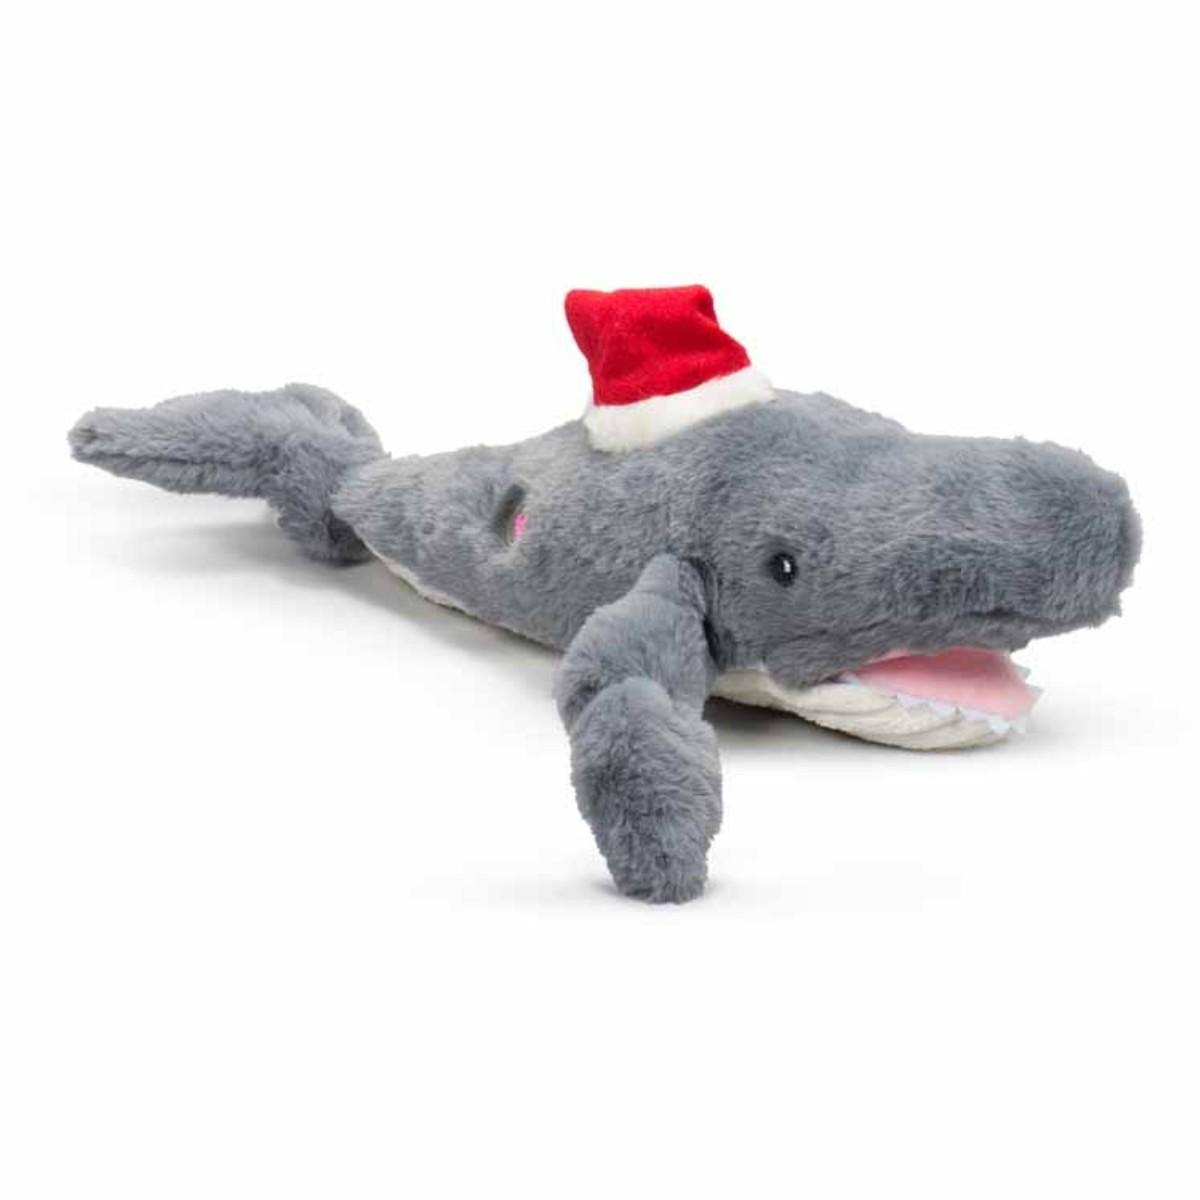 HuggleHounds Holiday Knottie Dog Toy - Whale of A Santa - Super Size